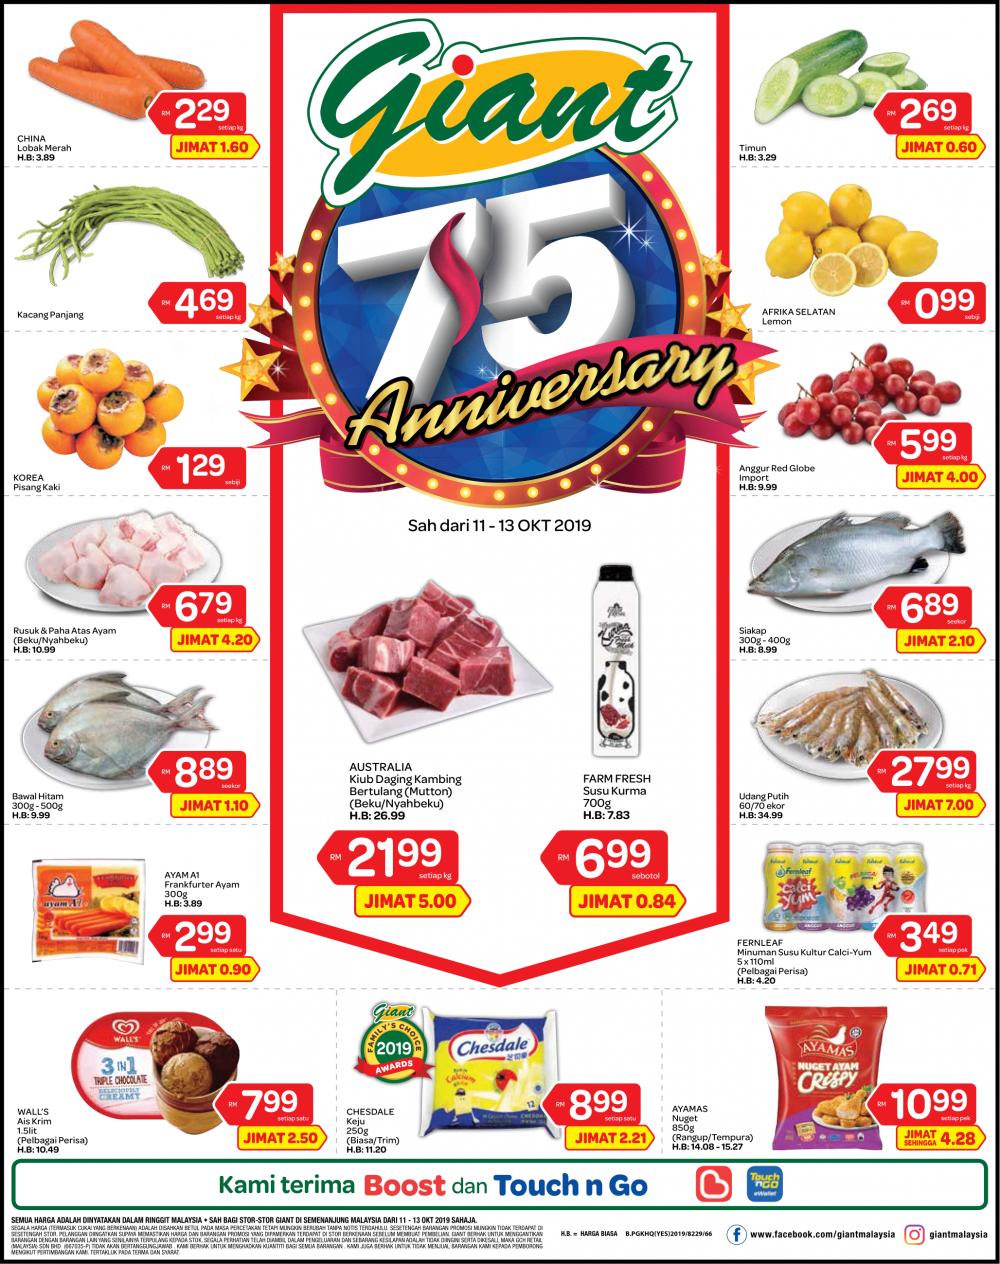 Giant Extra Savings Promotion (11 October 2019 - 13 October 2019)